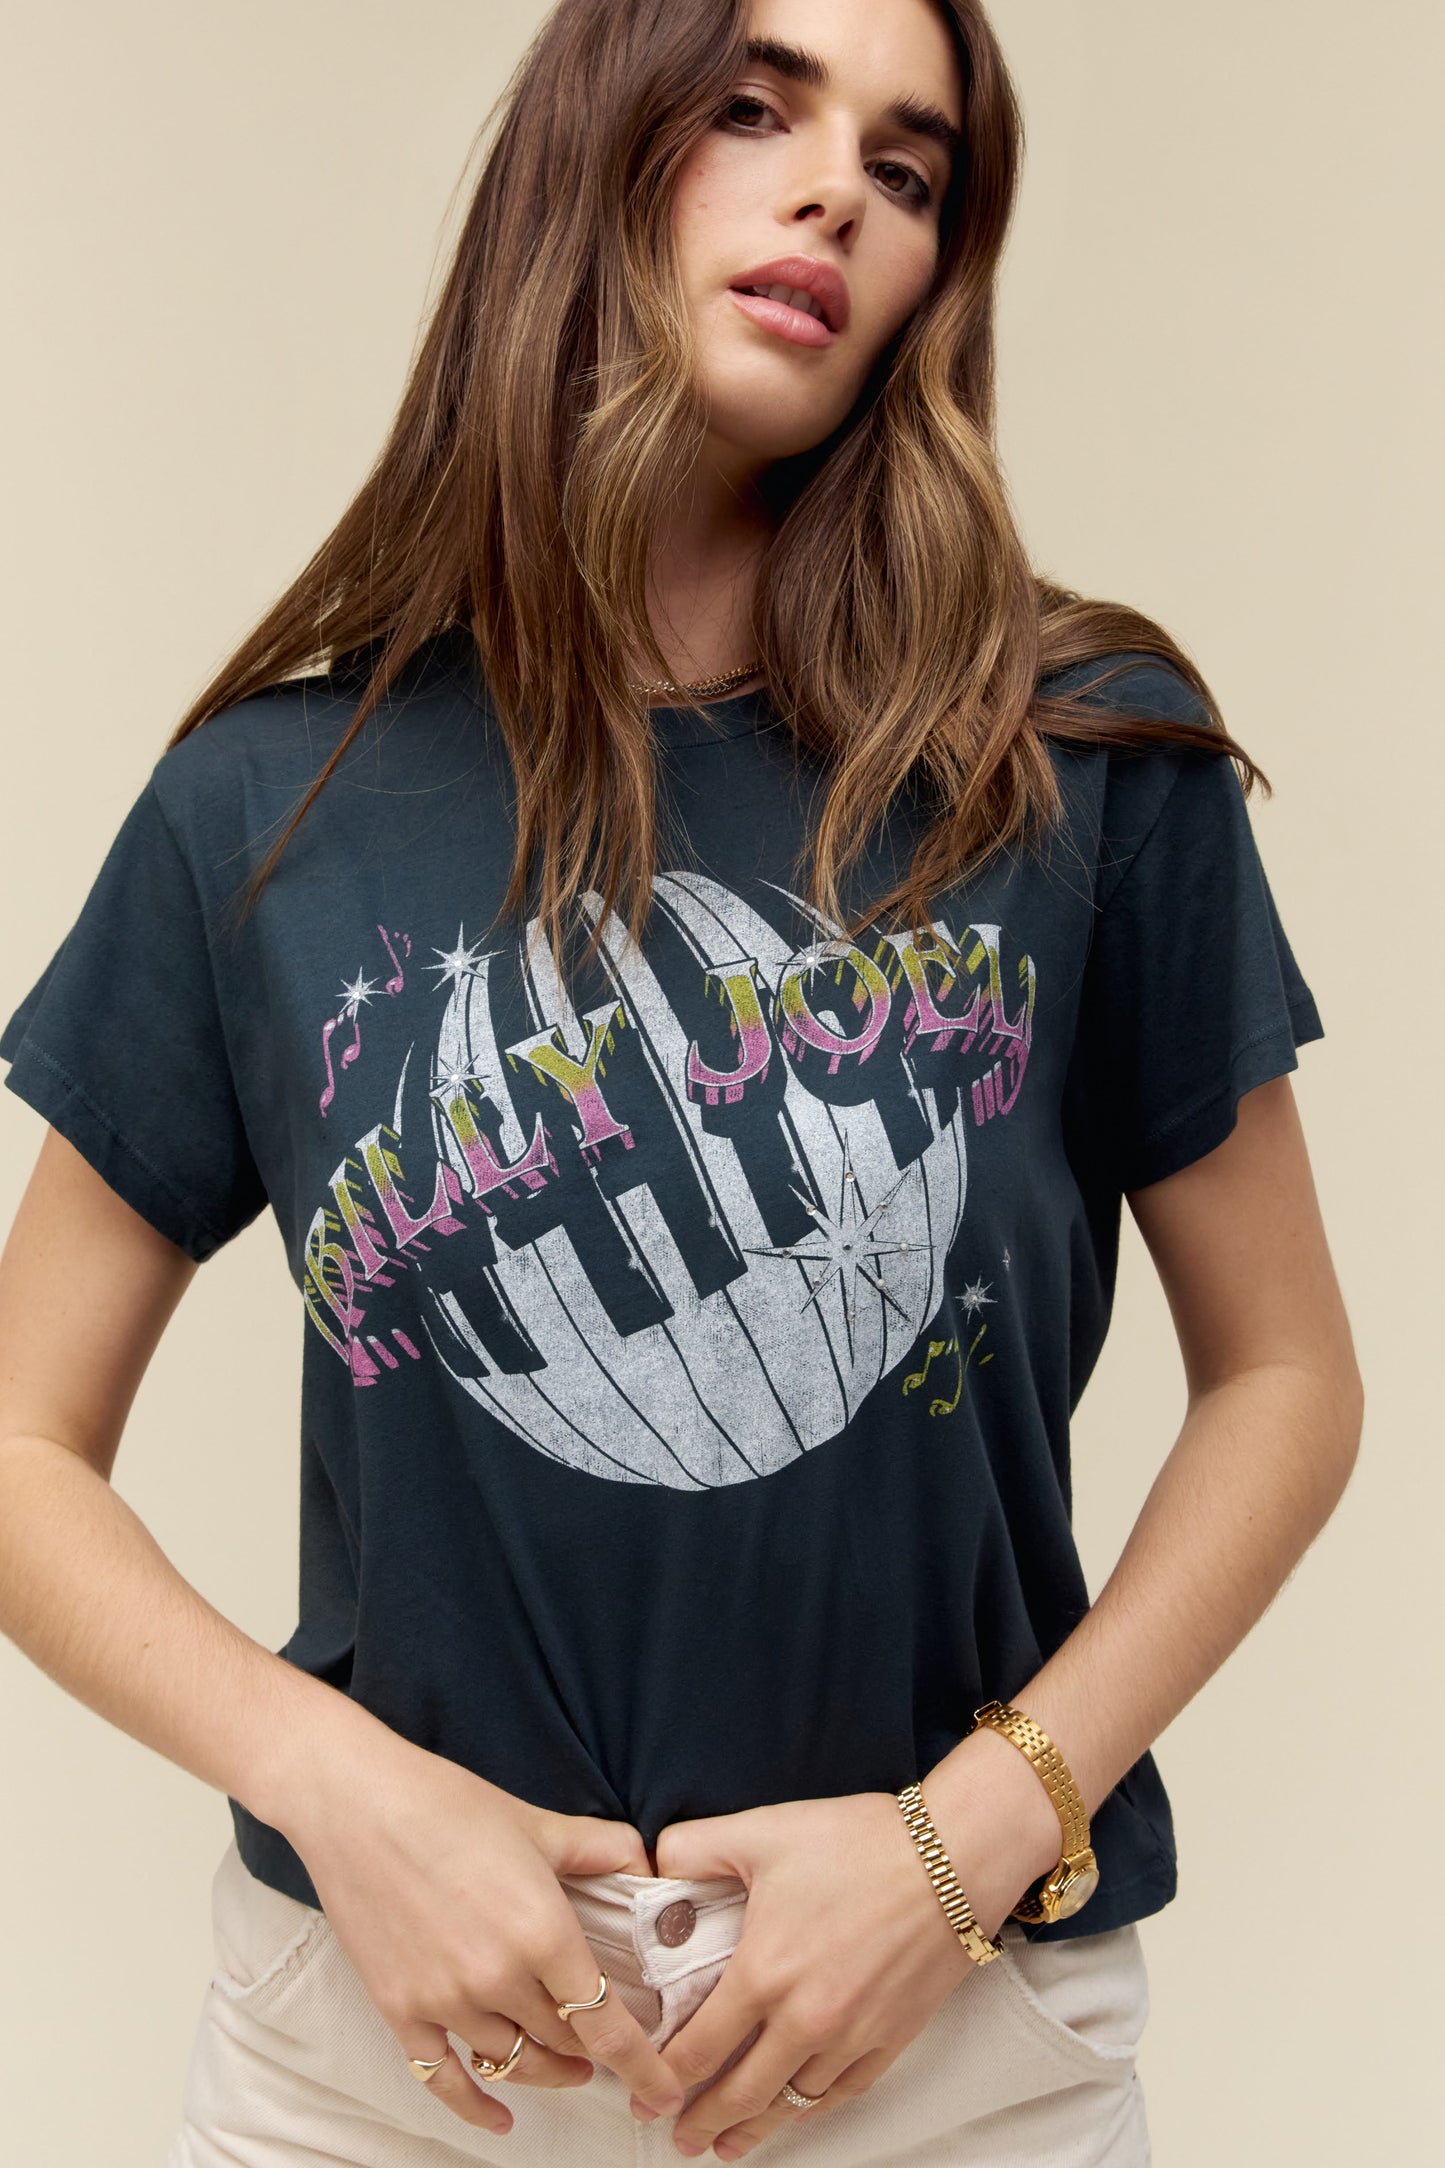 A dark-haired model featuring a black tee designed with piano keys wrapped around a disco ball and the icon’s name spelled out in bold text.